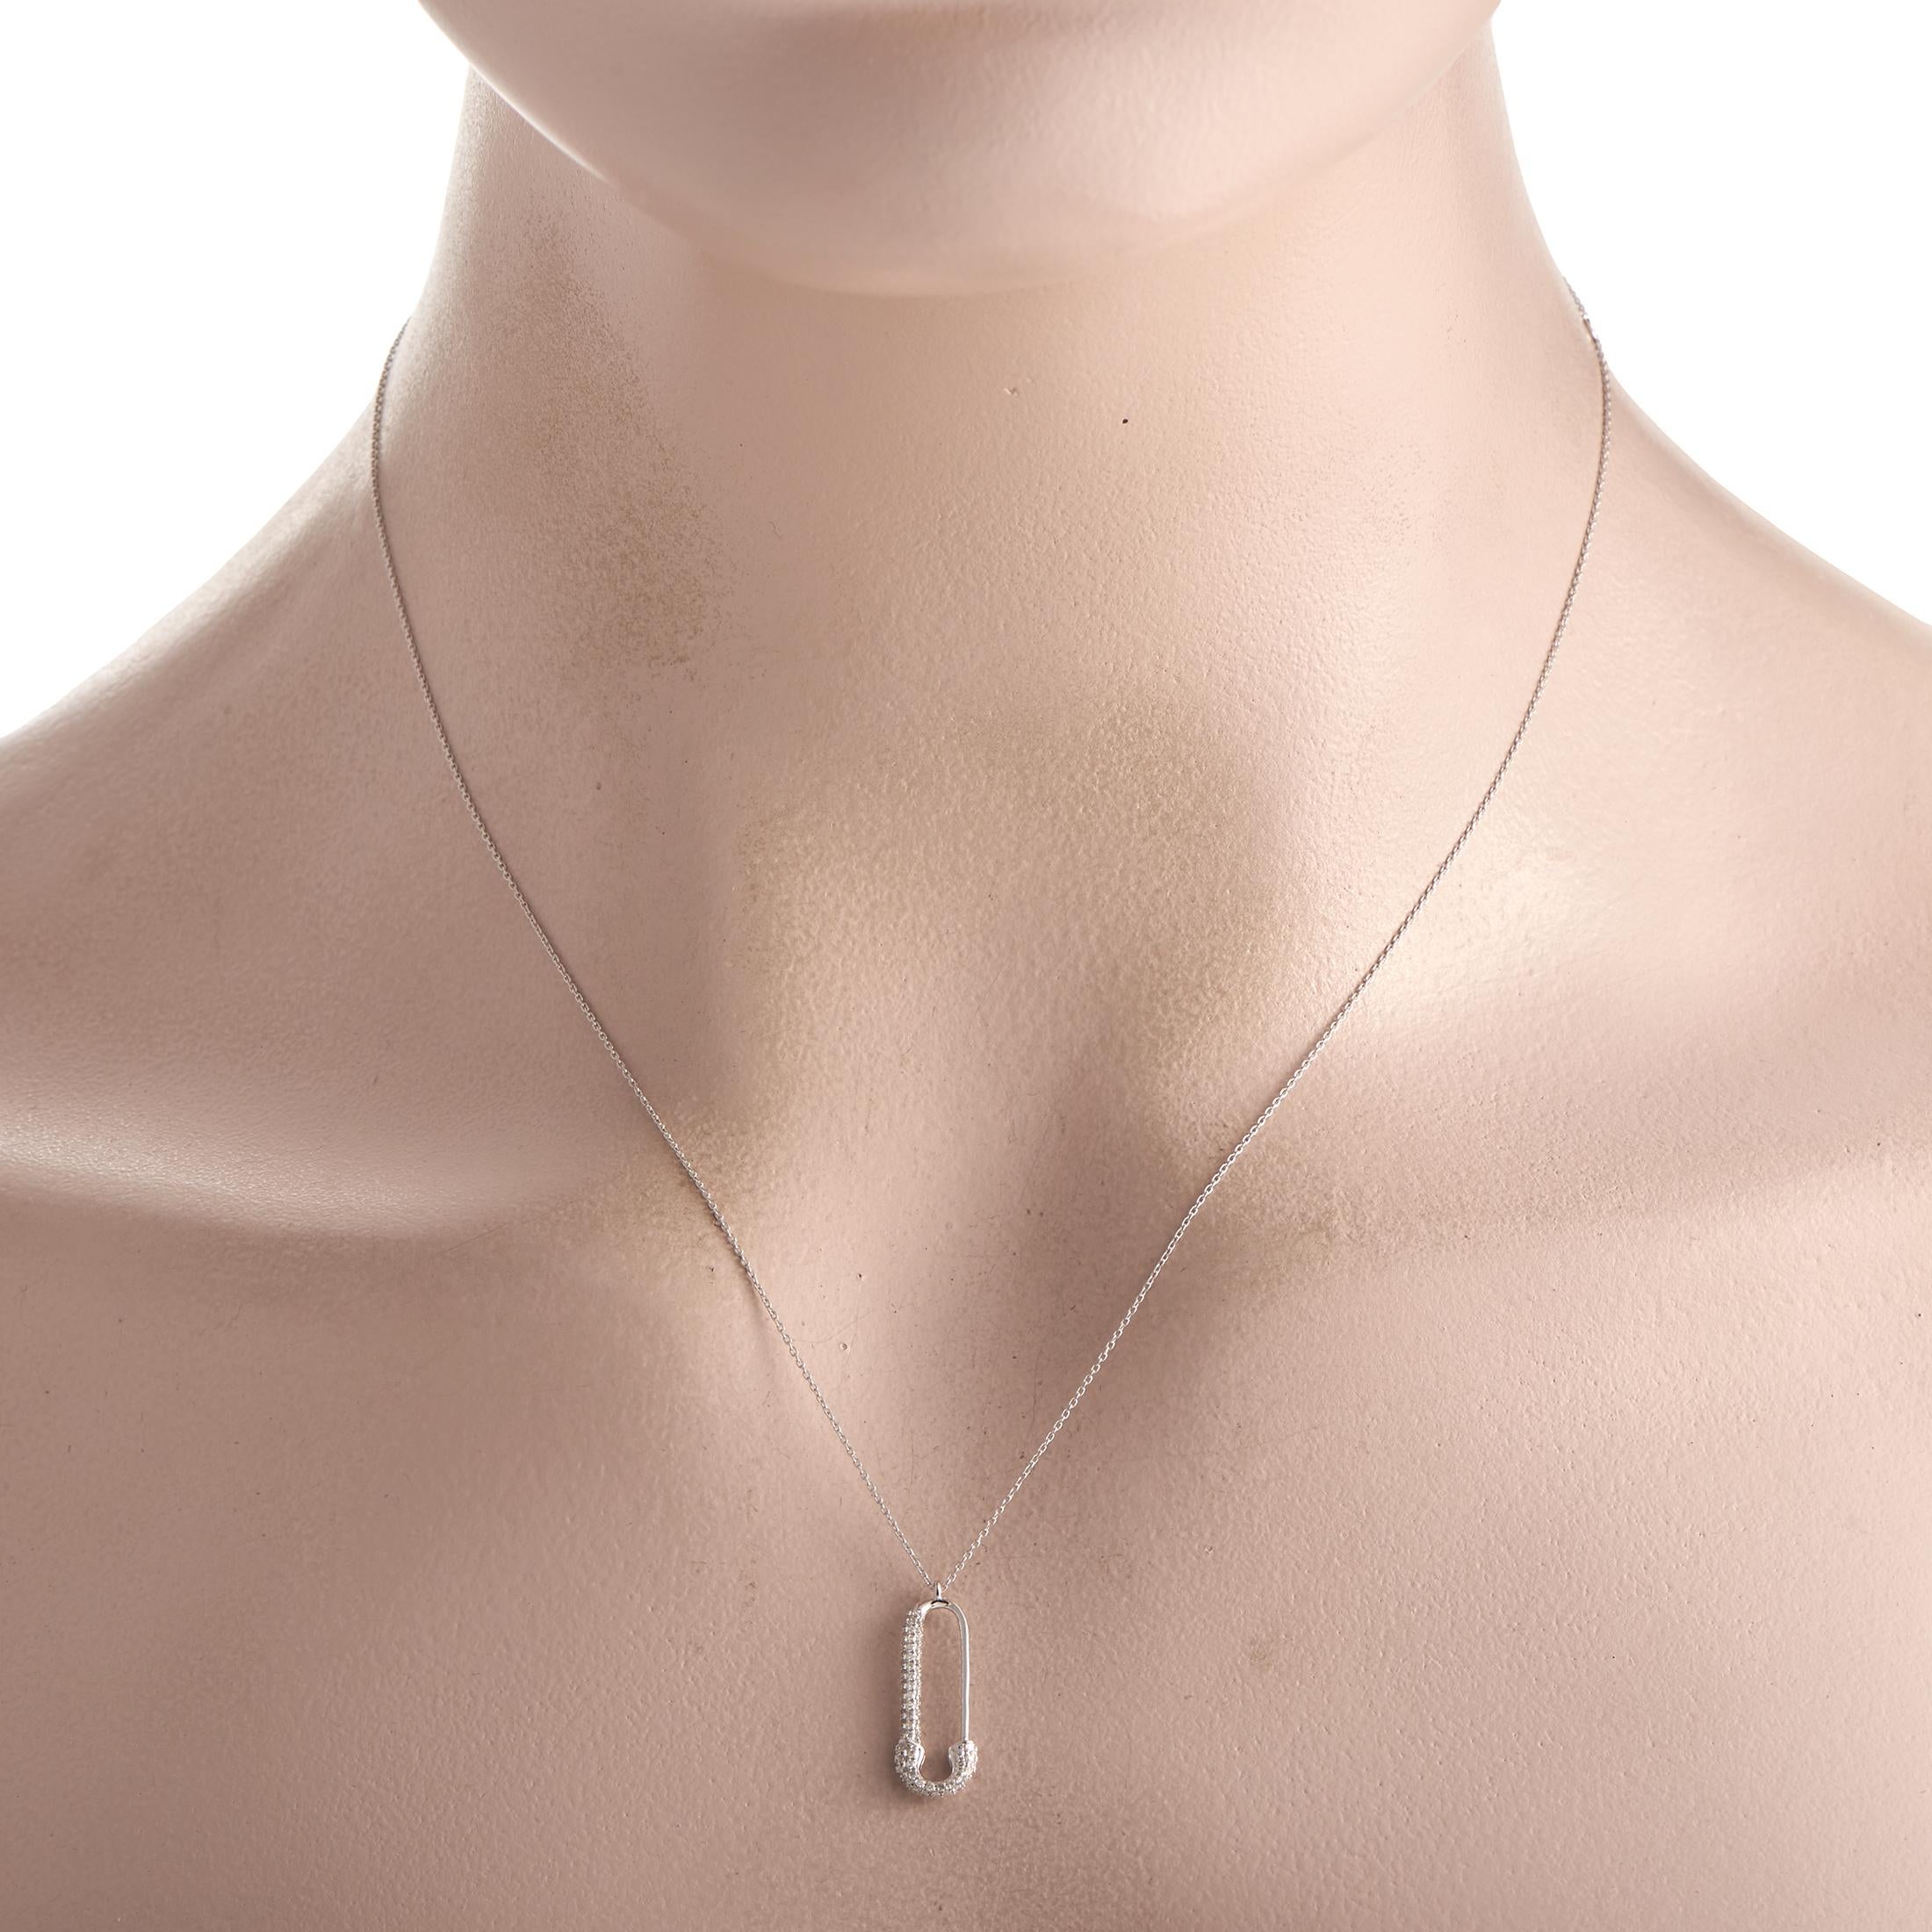 This luxurious necklace is simply unforgettable. Suspended from a delicate 18 chain, youll find a charming safety pin pendant measuring 0.75 long by 0.13 wide  its also elevated by inset diamond accents with a total weight of 0.17 carats.This